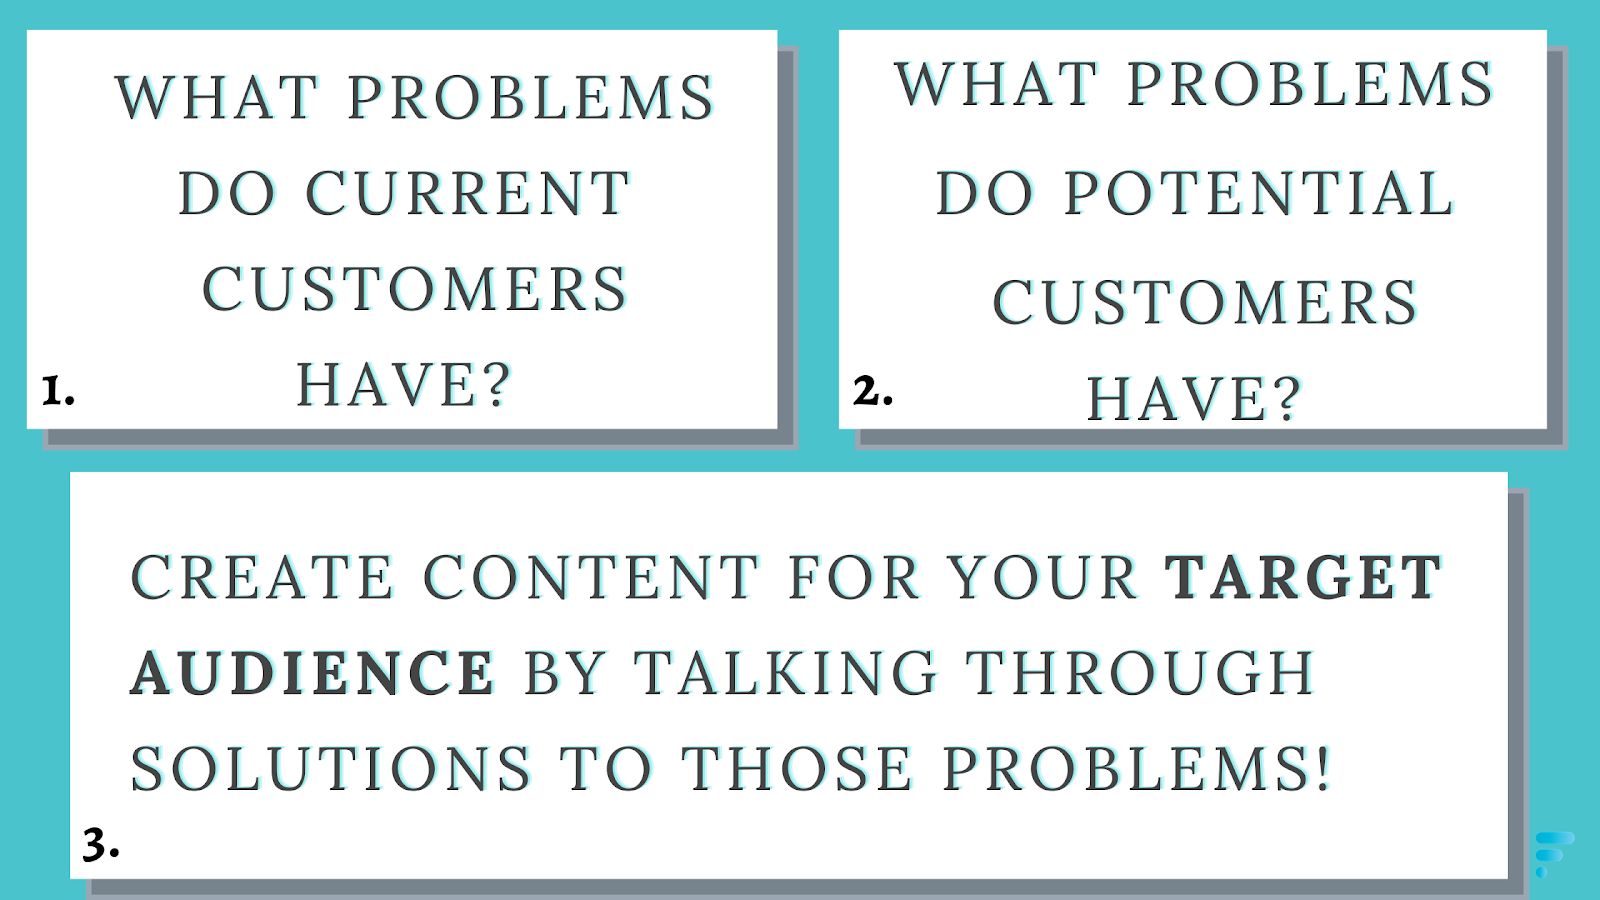 Ask yourself, what problems do current customers have? What problems do potential customers have? Based on those answers, create content that speaks directly to them and offer free solutions so they gain trust from you. 